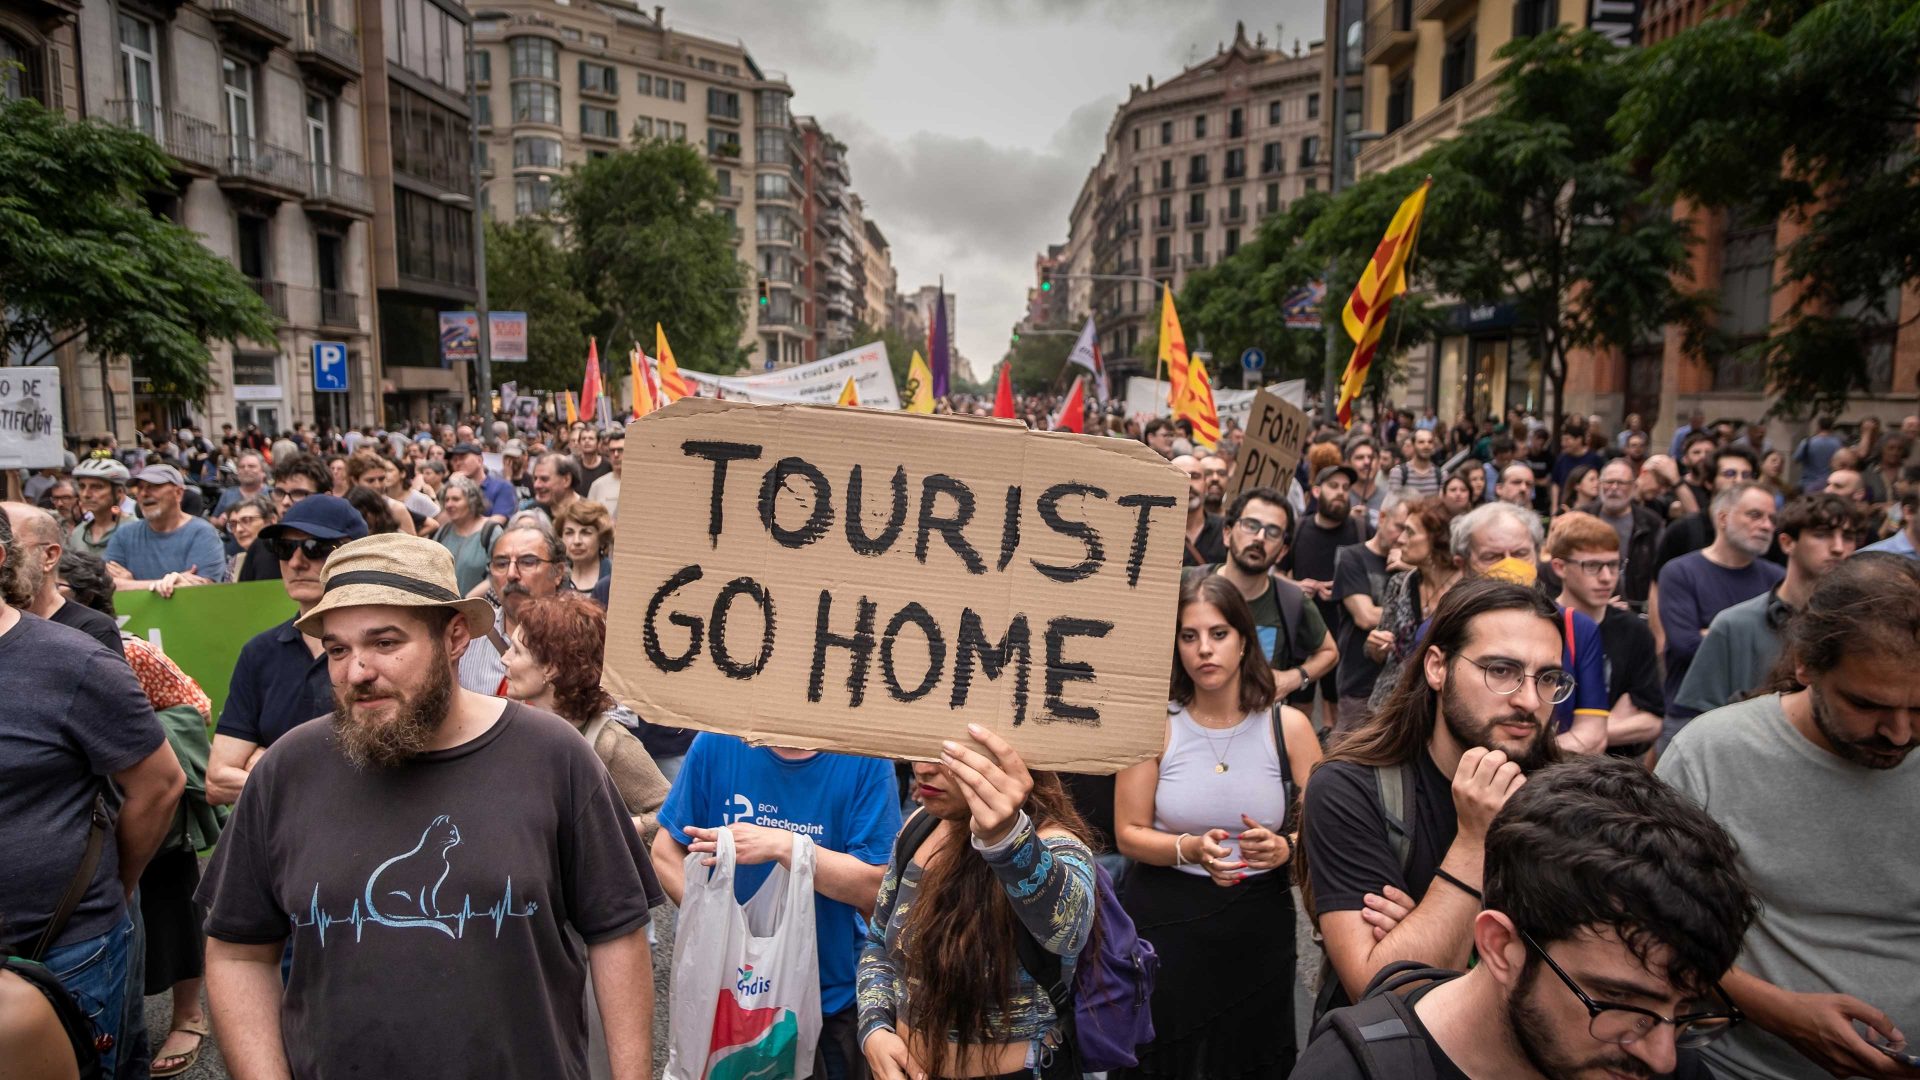 An anti-tourism placard is seen in the center of the demonstration. Photo: Paco Freire/SOPA Images/LightRocket via Getty Images 